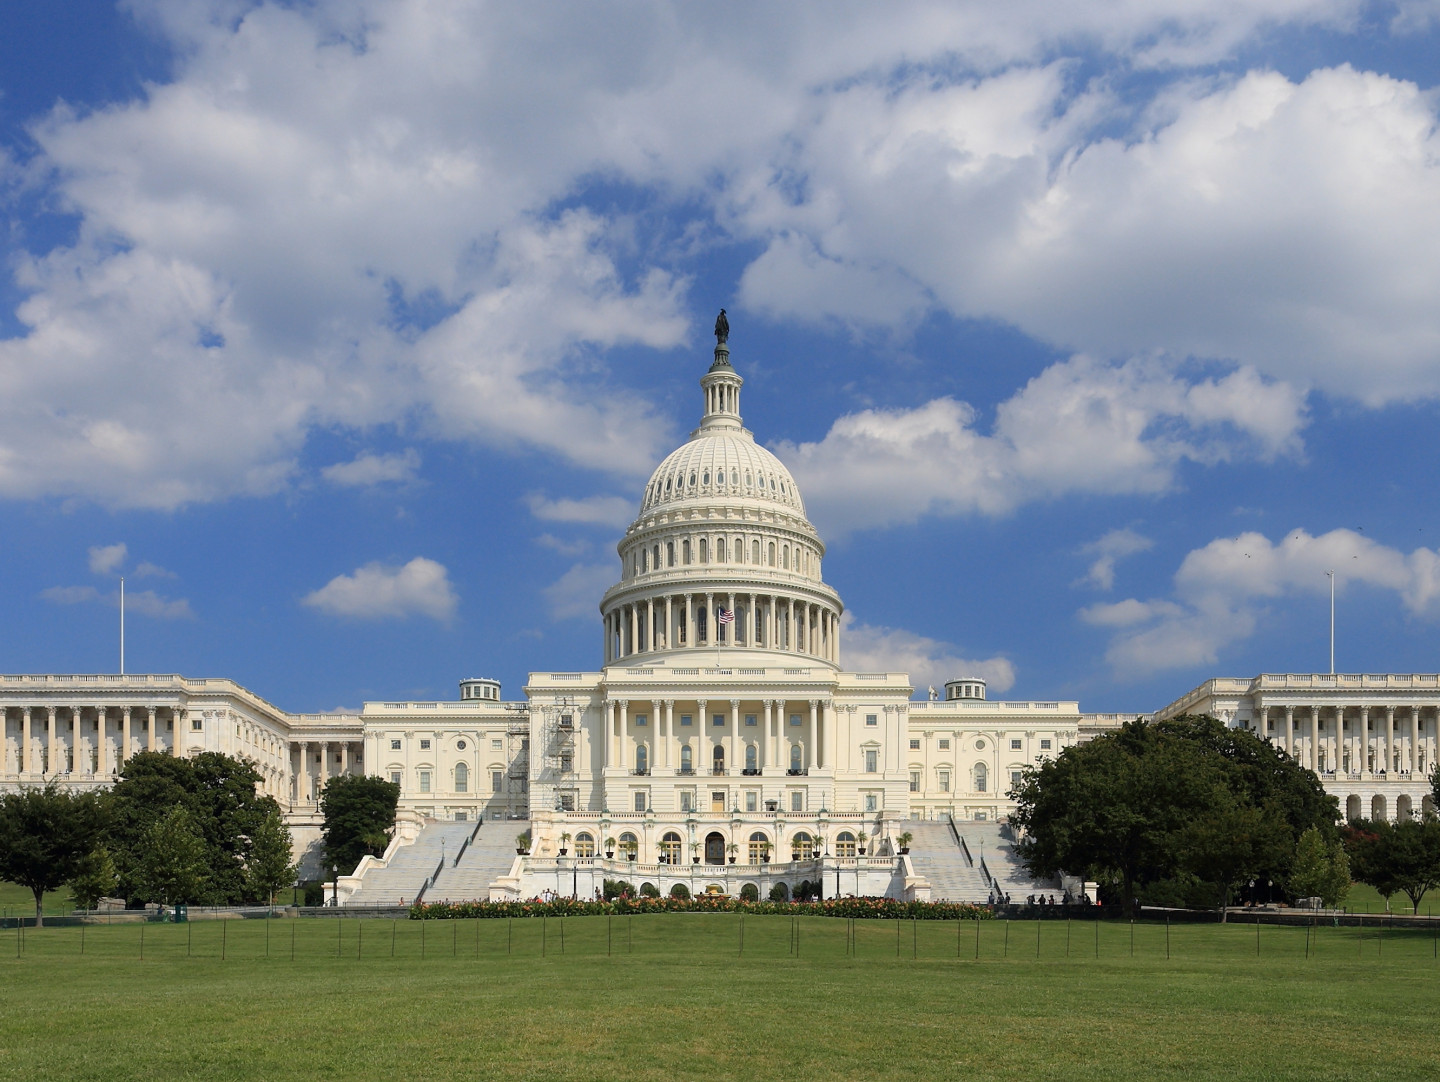 The west side of the us capitol. Above a blue sky, below a green lawn, between, the white building with it's large dome and columns filling the middle distance.